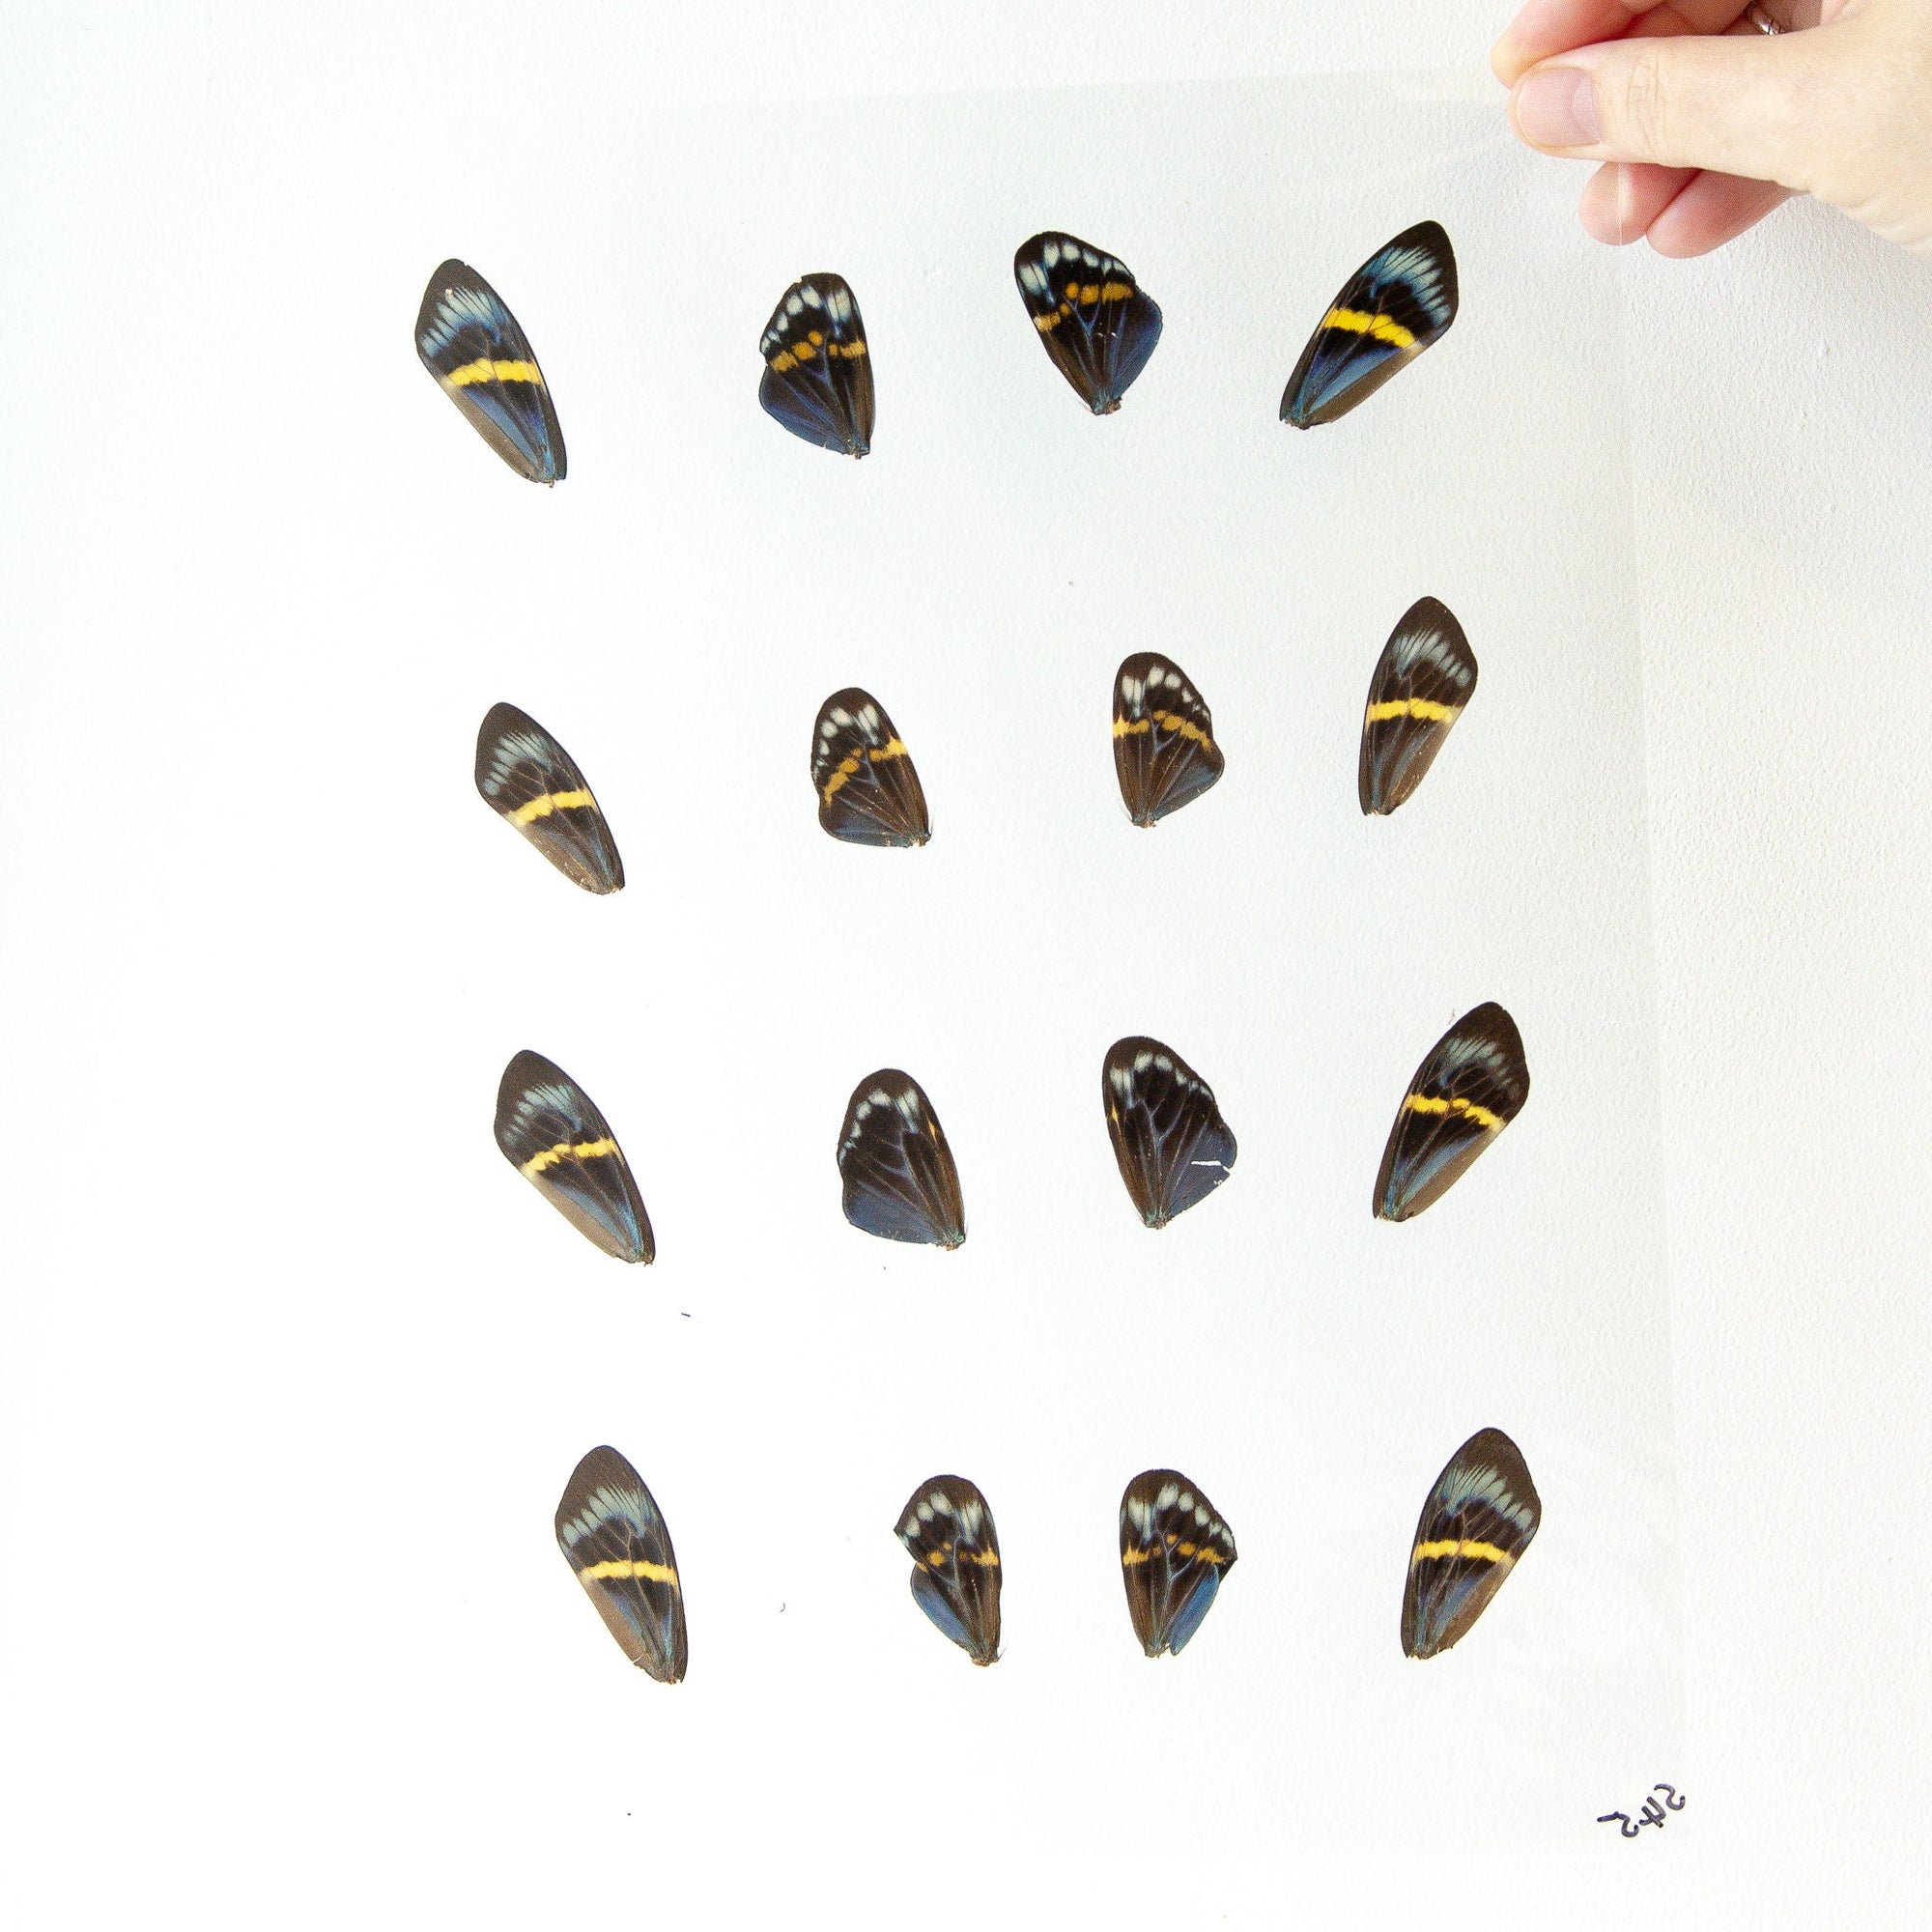 Butterfly Wings GLOSSY LAMINATED SHEET Real Ethically Sourced Specimens Moths Butterflies Wings for Art -- S45